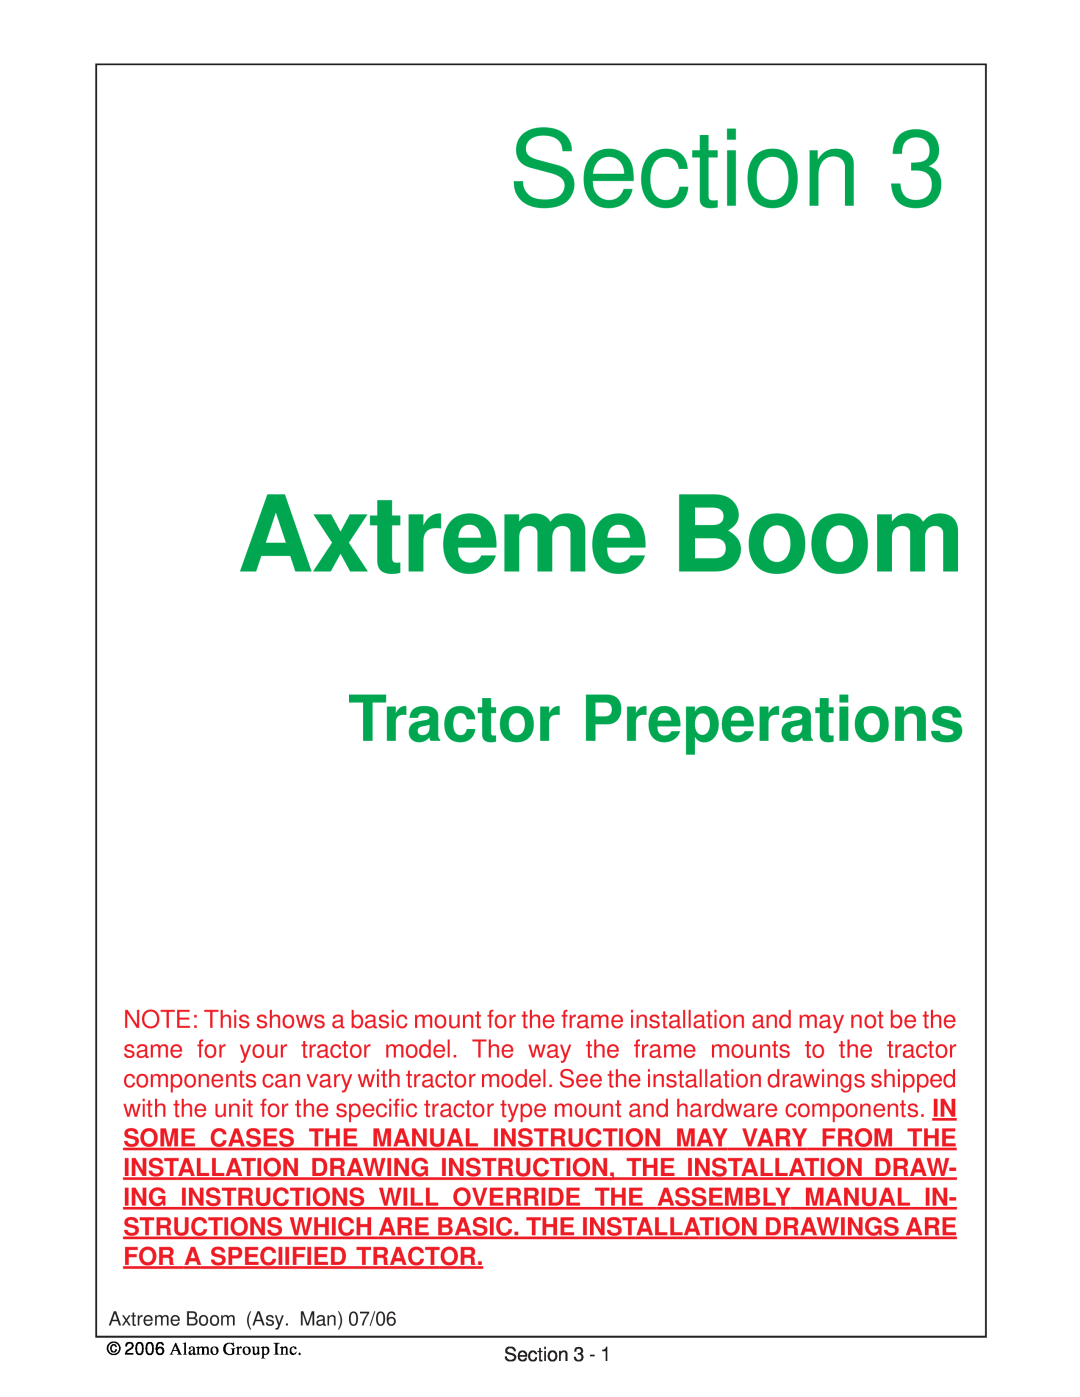 Alamo 02984405 instruction manual Tractor Preperations, Section, Axtreme Boom Asy. Man 07/06 